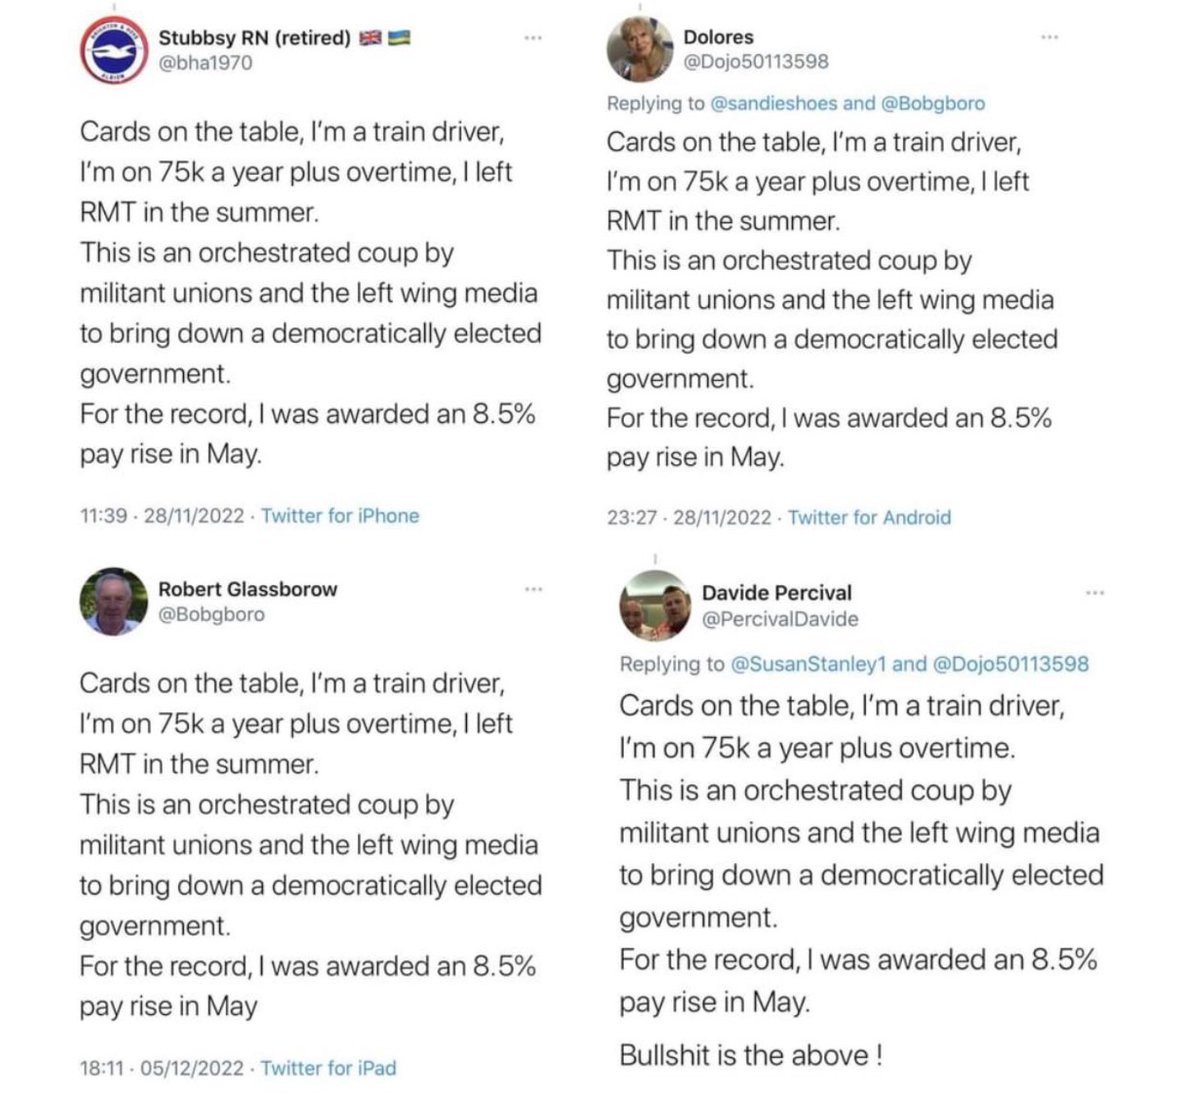 Cards on the table, we’ve misplaced some train drivers ⬇️
There appears to be an orchestrated coup by people who use terms like ‘militant unions’ and ‘left wing media’ 🤔
Frankly, if you’re on 75k and we just won you an 8.5% pay rise in May, why would you ever leave?
#JoinAUnion